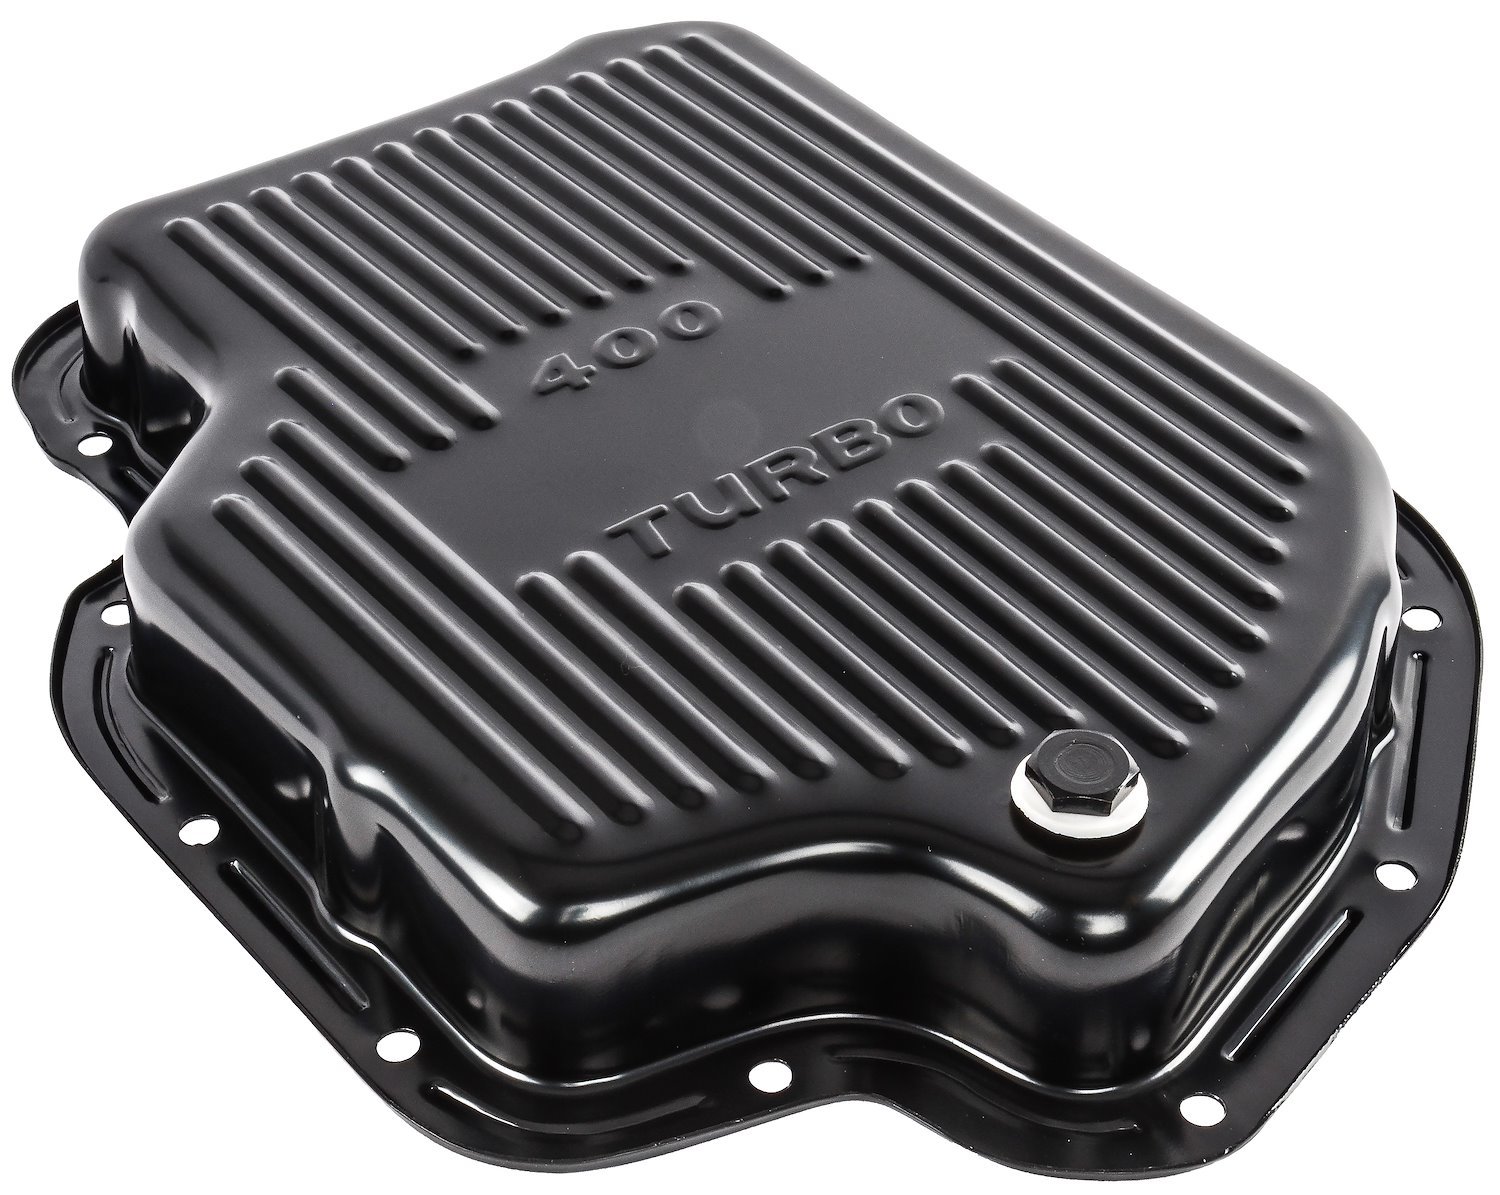 JEGS 601184: Automatic Transmission Pan Fits GM TH400 Automatic  Transmission Stamped with Turbo 400 on Bottom 7/8 in. Deep Ribbed  Design for Strength 16-gauge Steel Black Powder Coat Finish Includes  Drain Plug JEGS